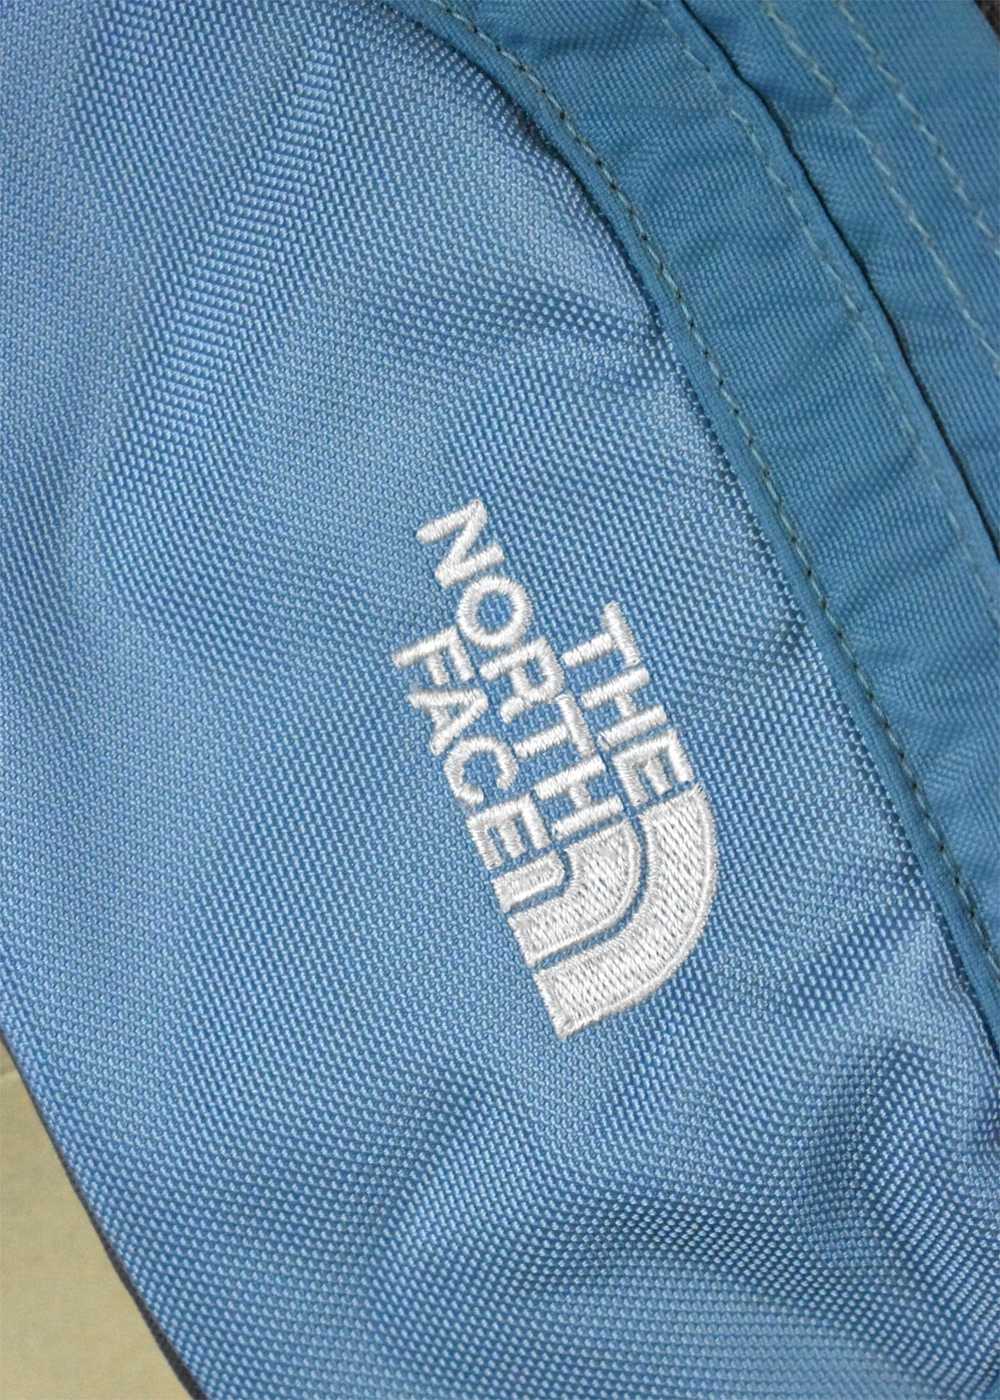 Baby Blue 1990's The Northface Fannypack - image 2